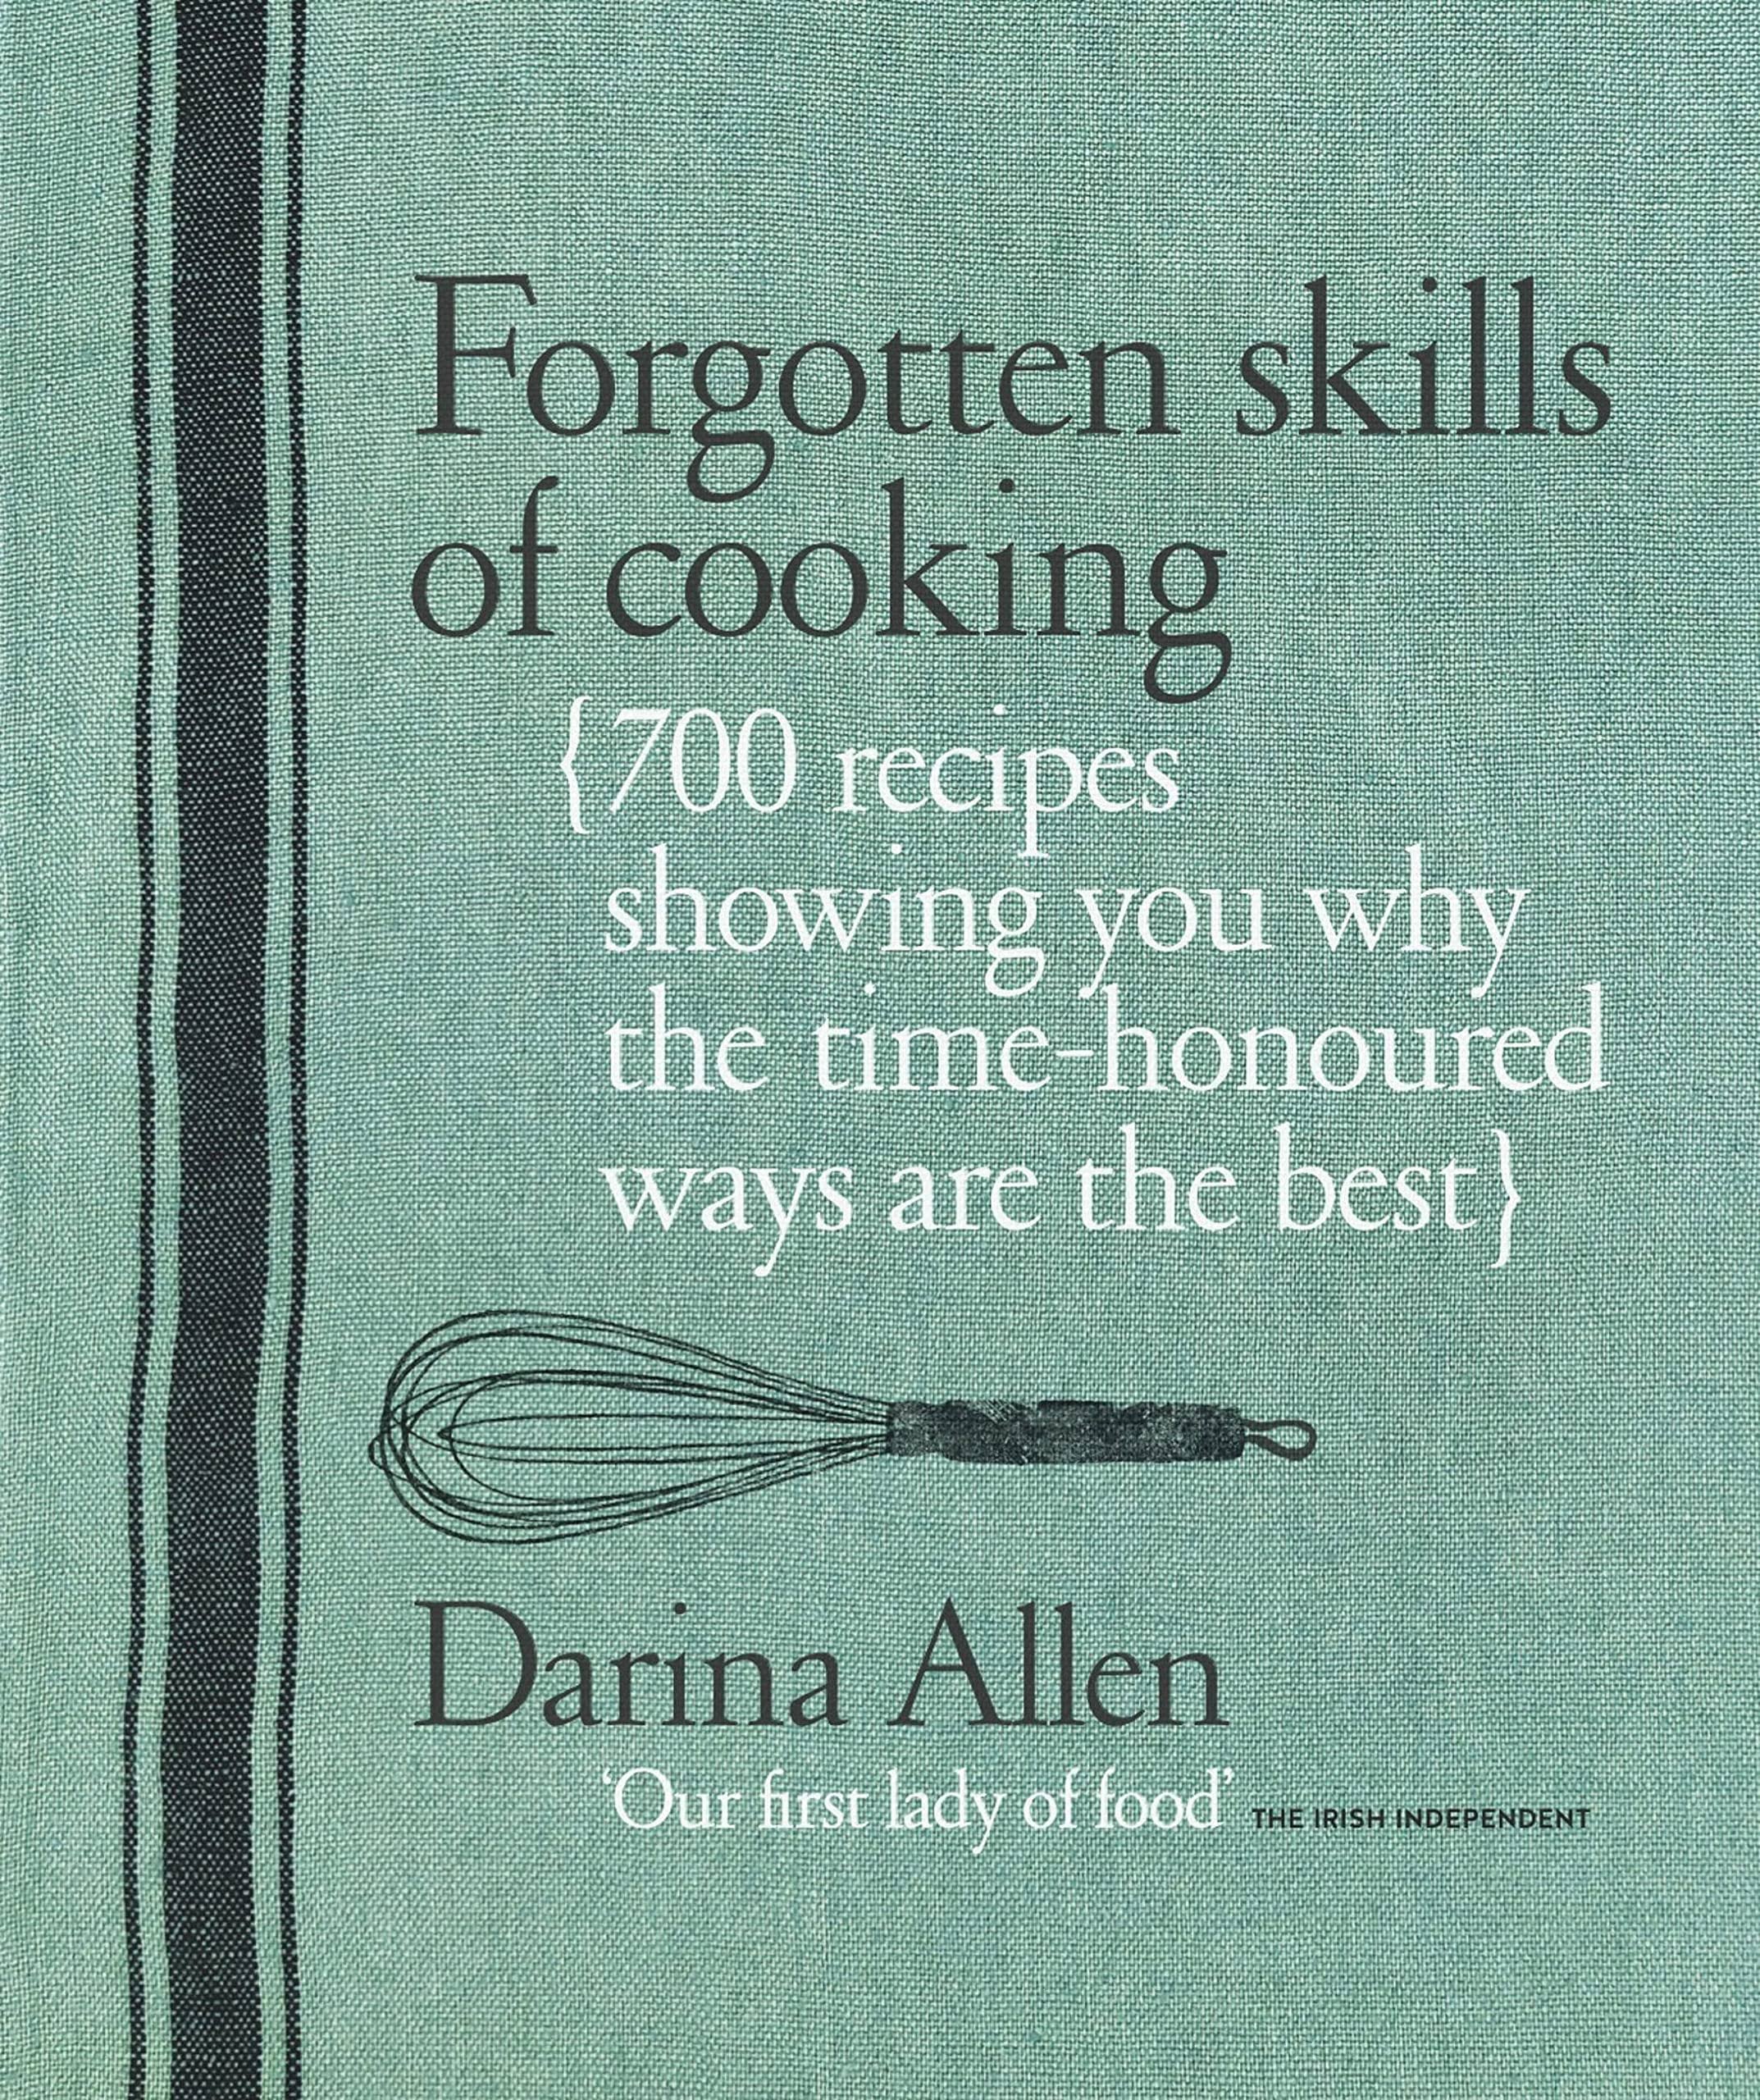 Forgotten Skills of Cooking [Book]